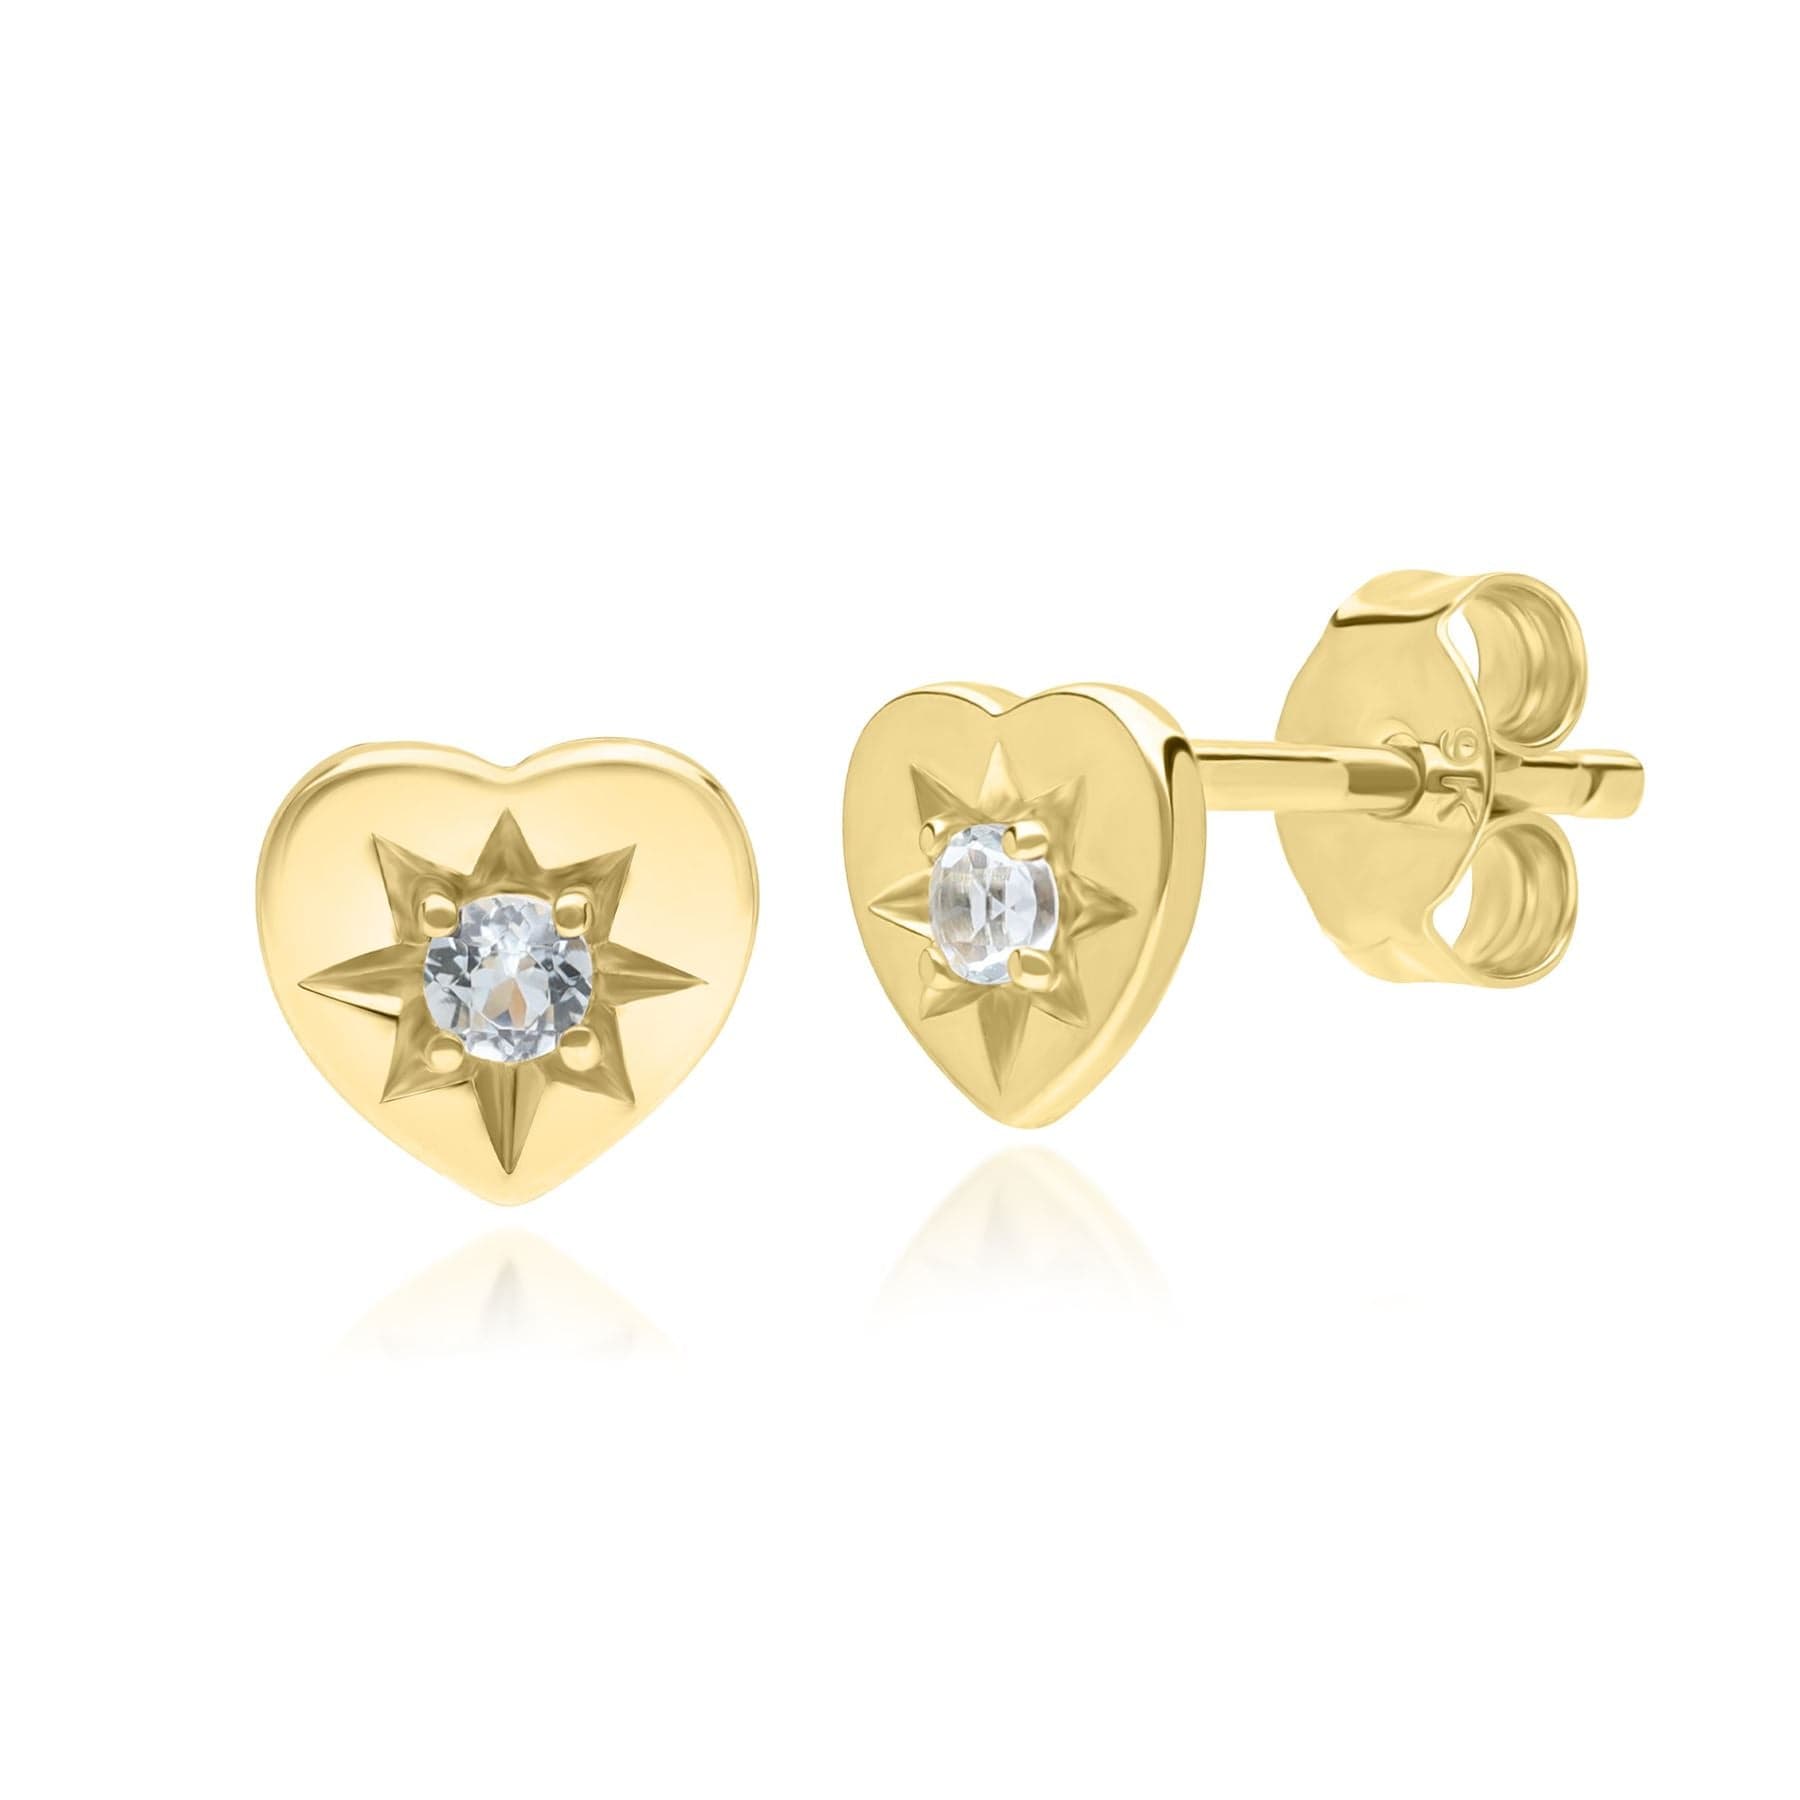 135E1820029 ECFEW™ 'The Liberator' Blue Topaz Heart Stud Earrings in 9ct Yellow Gold Front